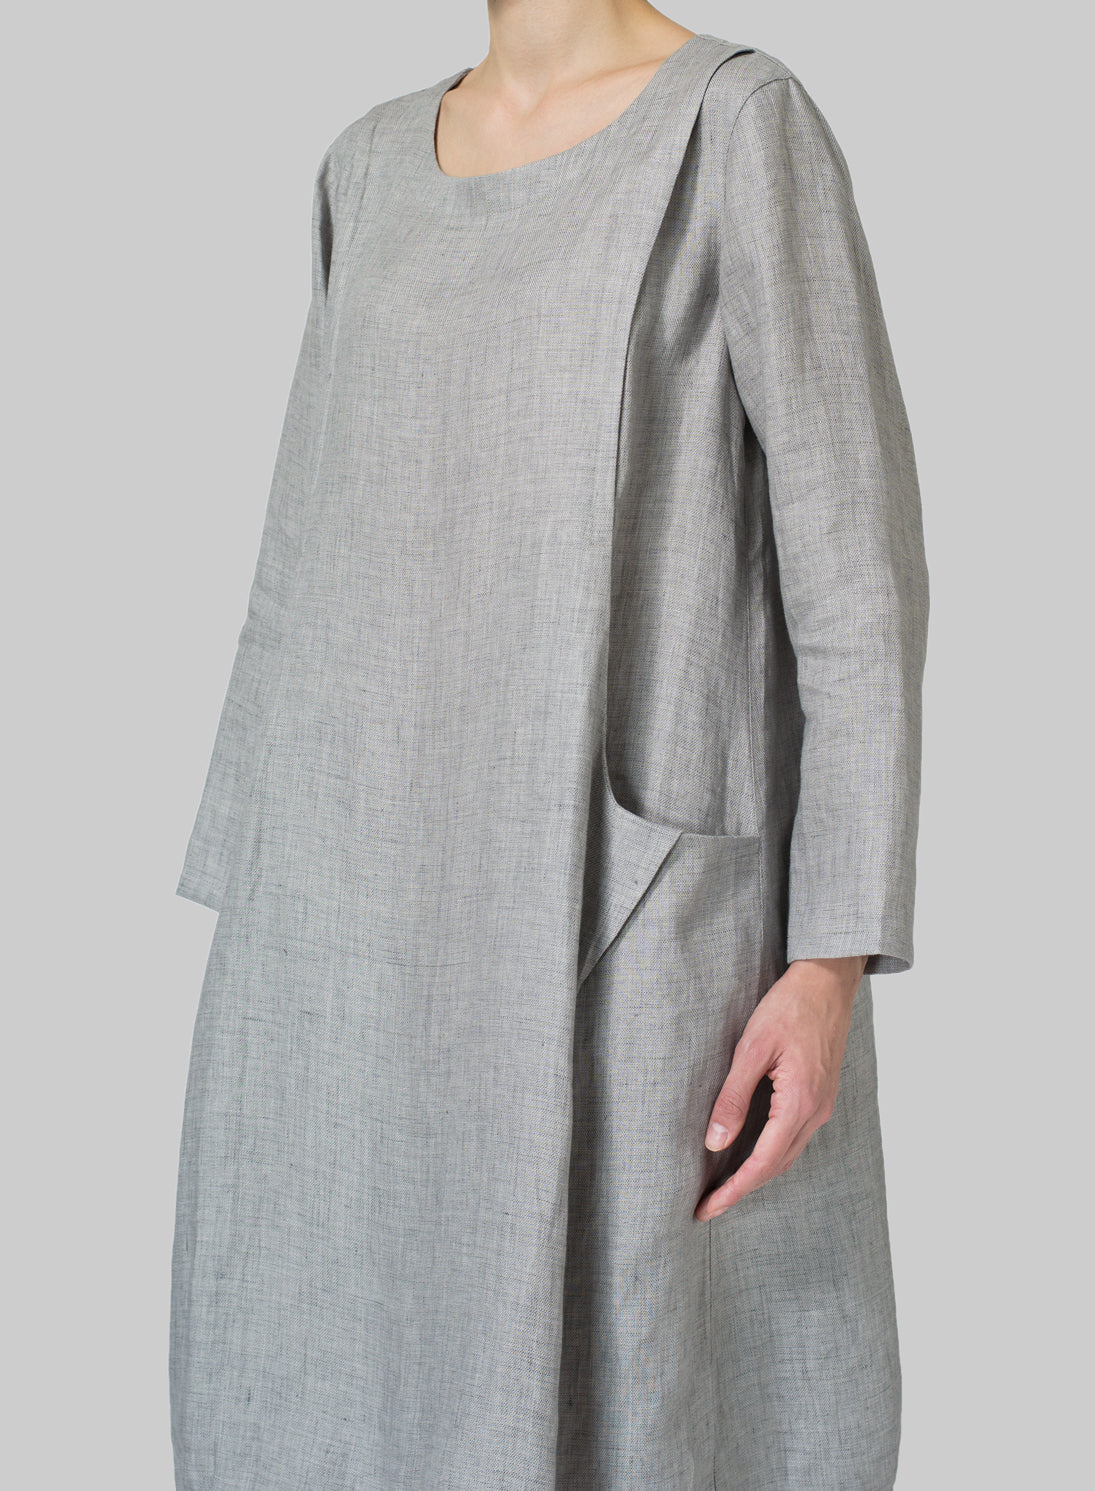 Cotton And Linen Luxe Pocket Dress - boddysize